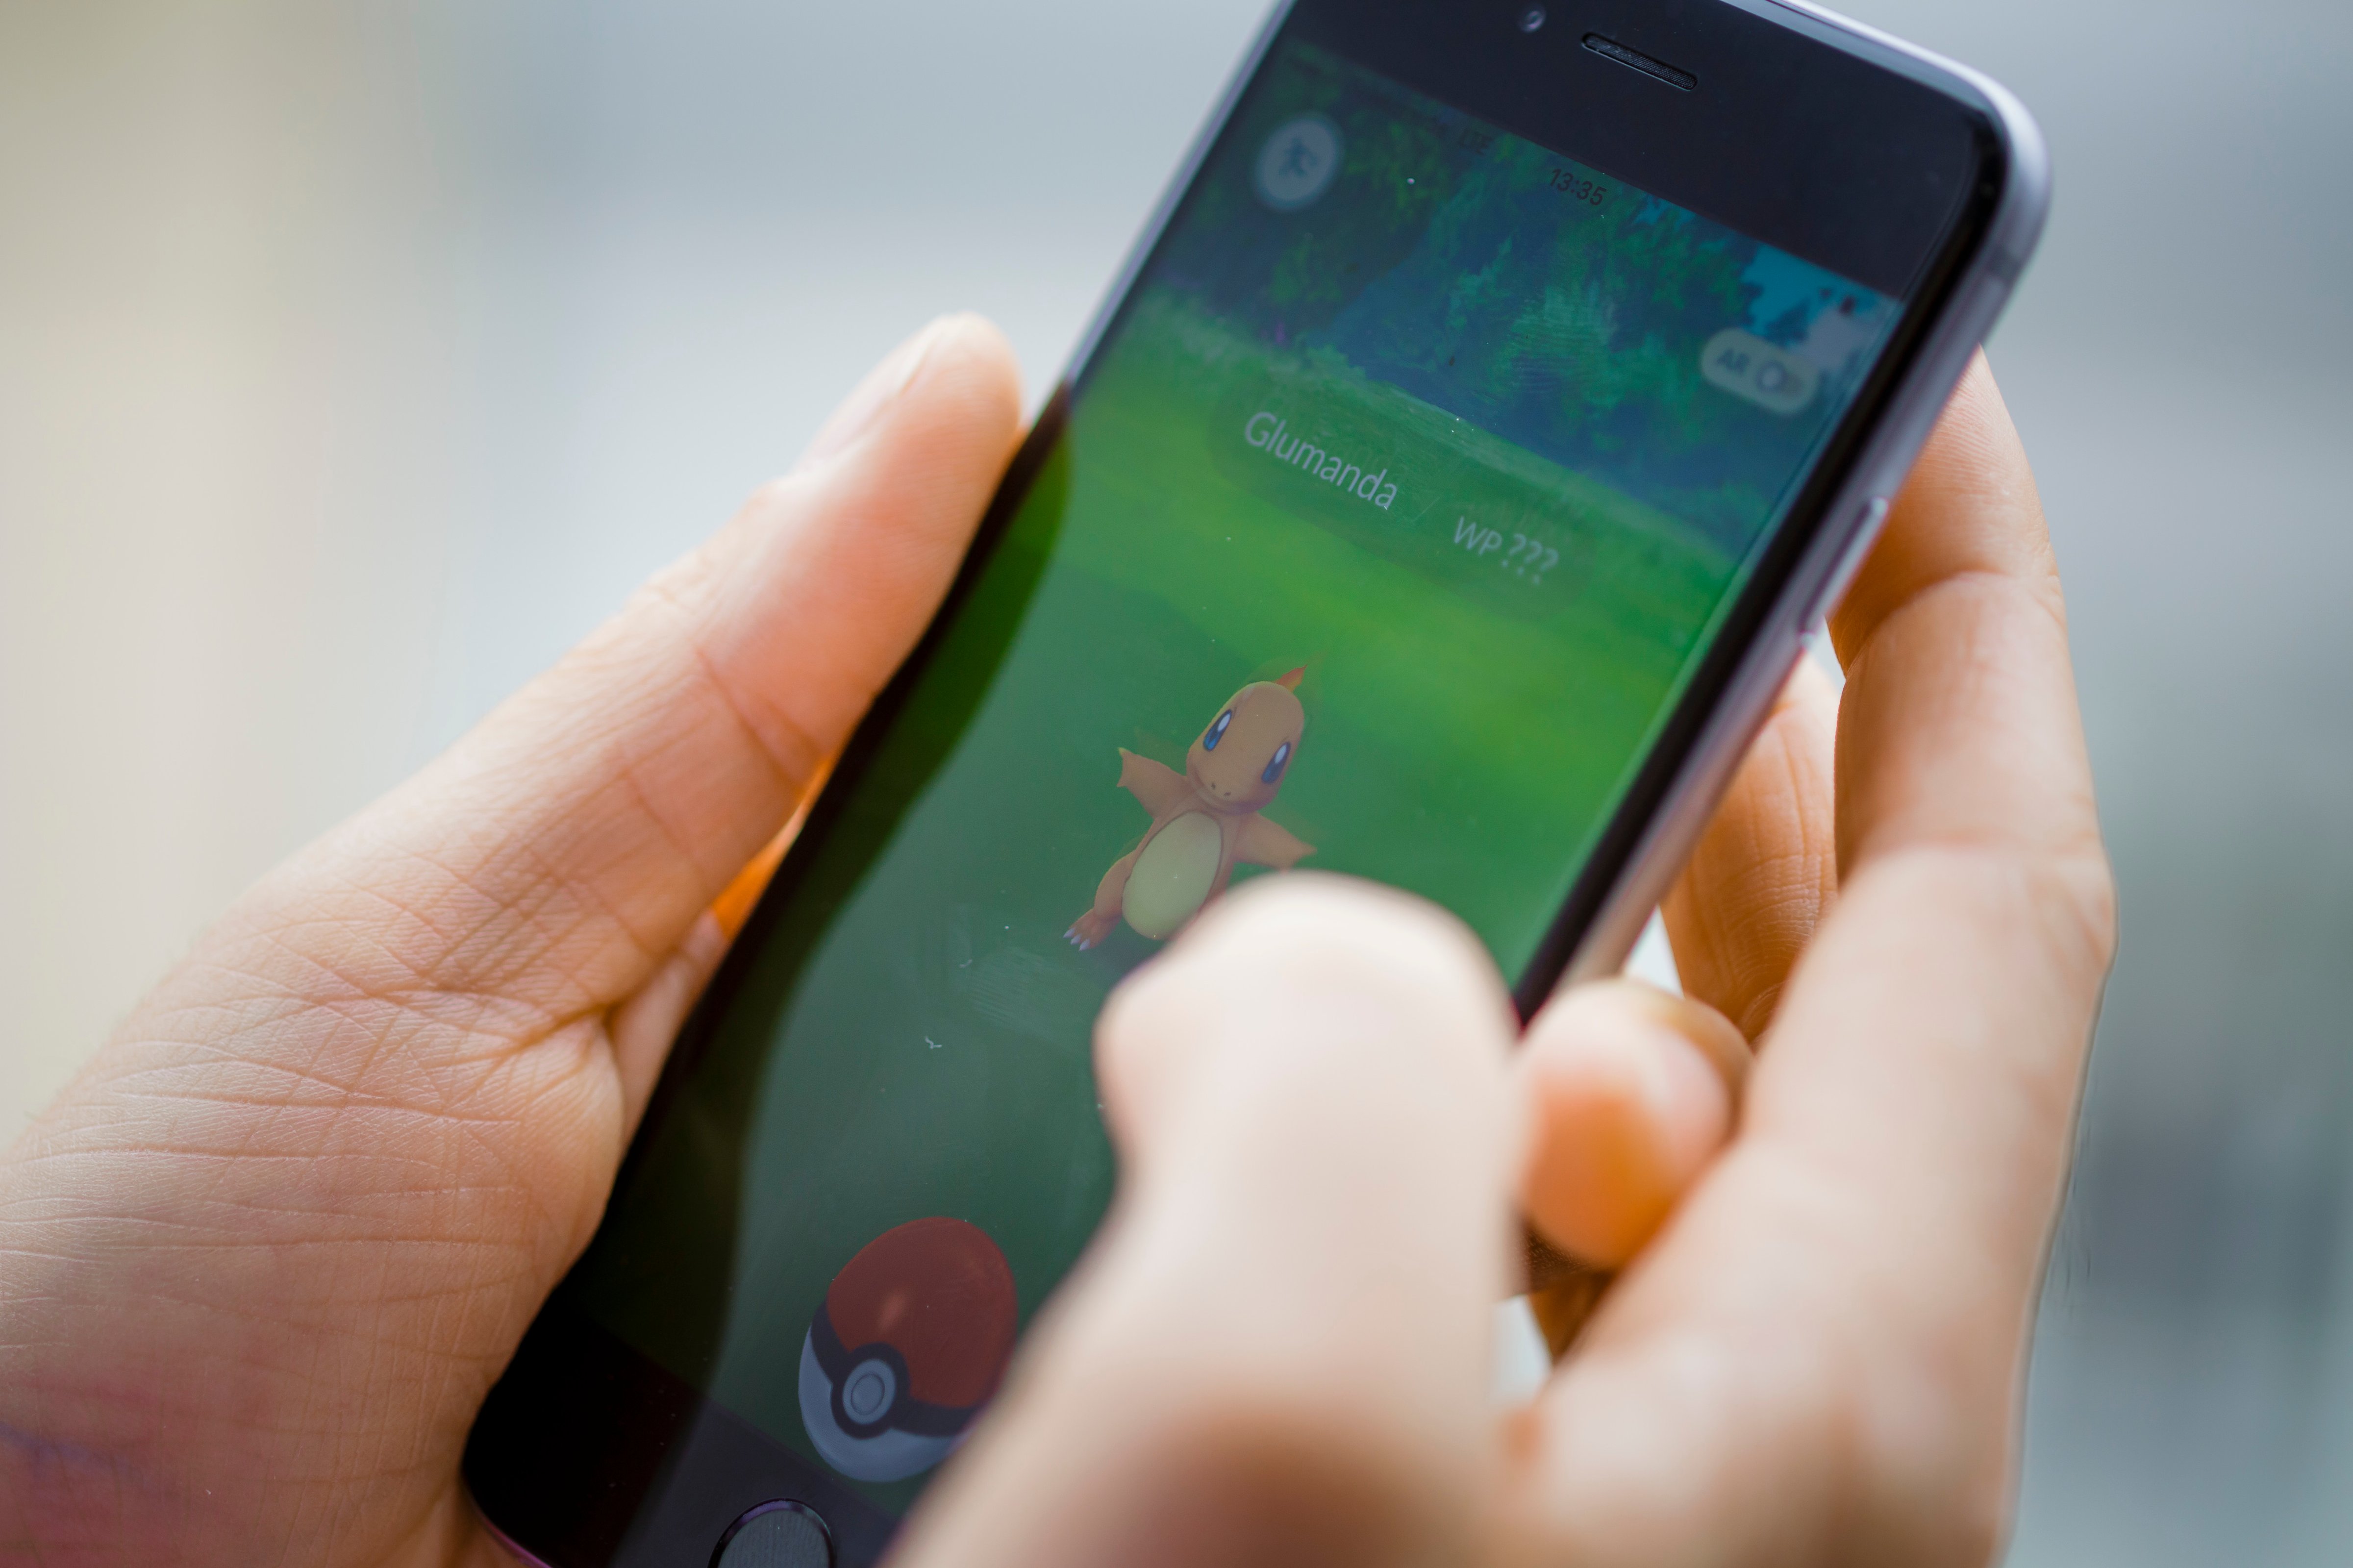 A Pokemon Go user plays the game on his smartphone on July 14, 2016. (Thomas Trutschel—Photothek/Getty Images)